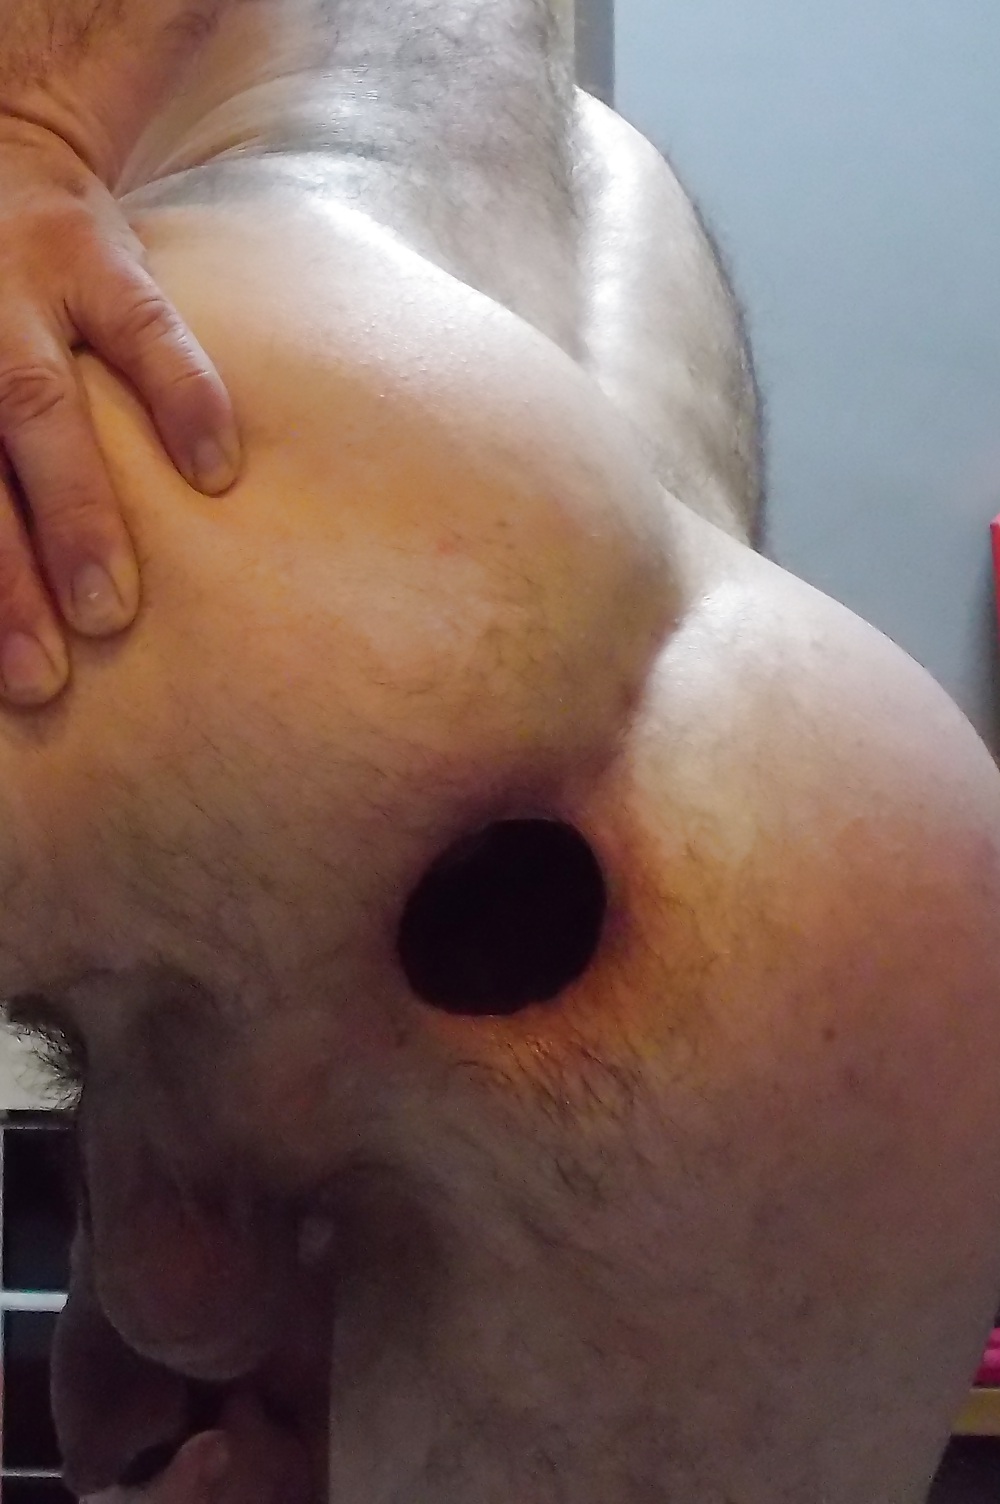 Anal gape and fist with a close up by Analisters #33951402